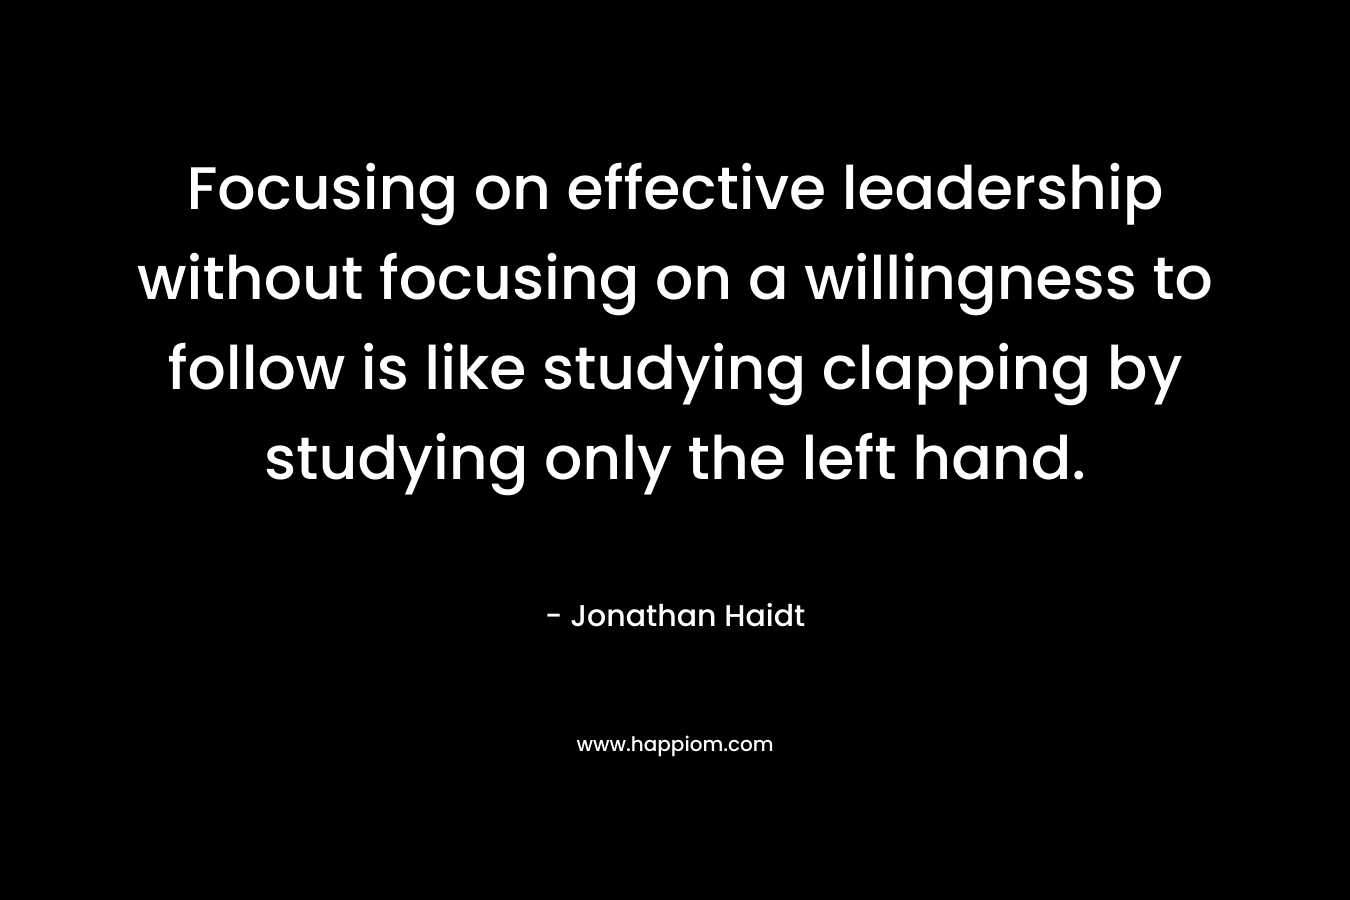 Focusing on effective leadership without focusing on a willingness to follow is like studying clapping by studying only the left hand.